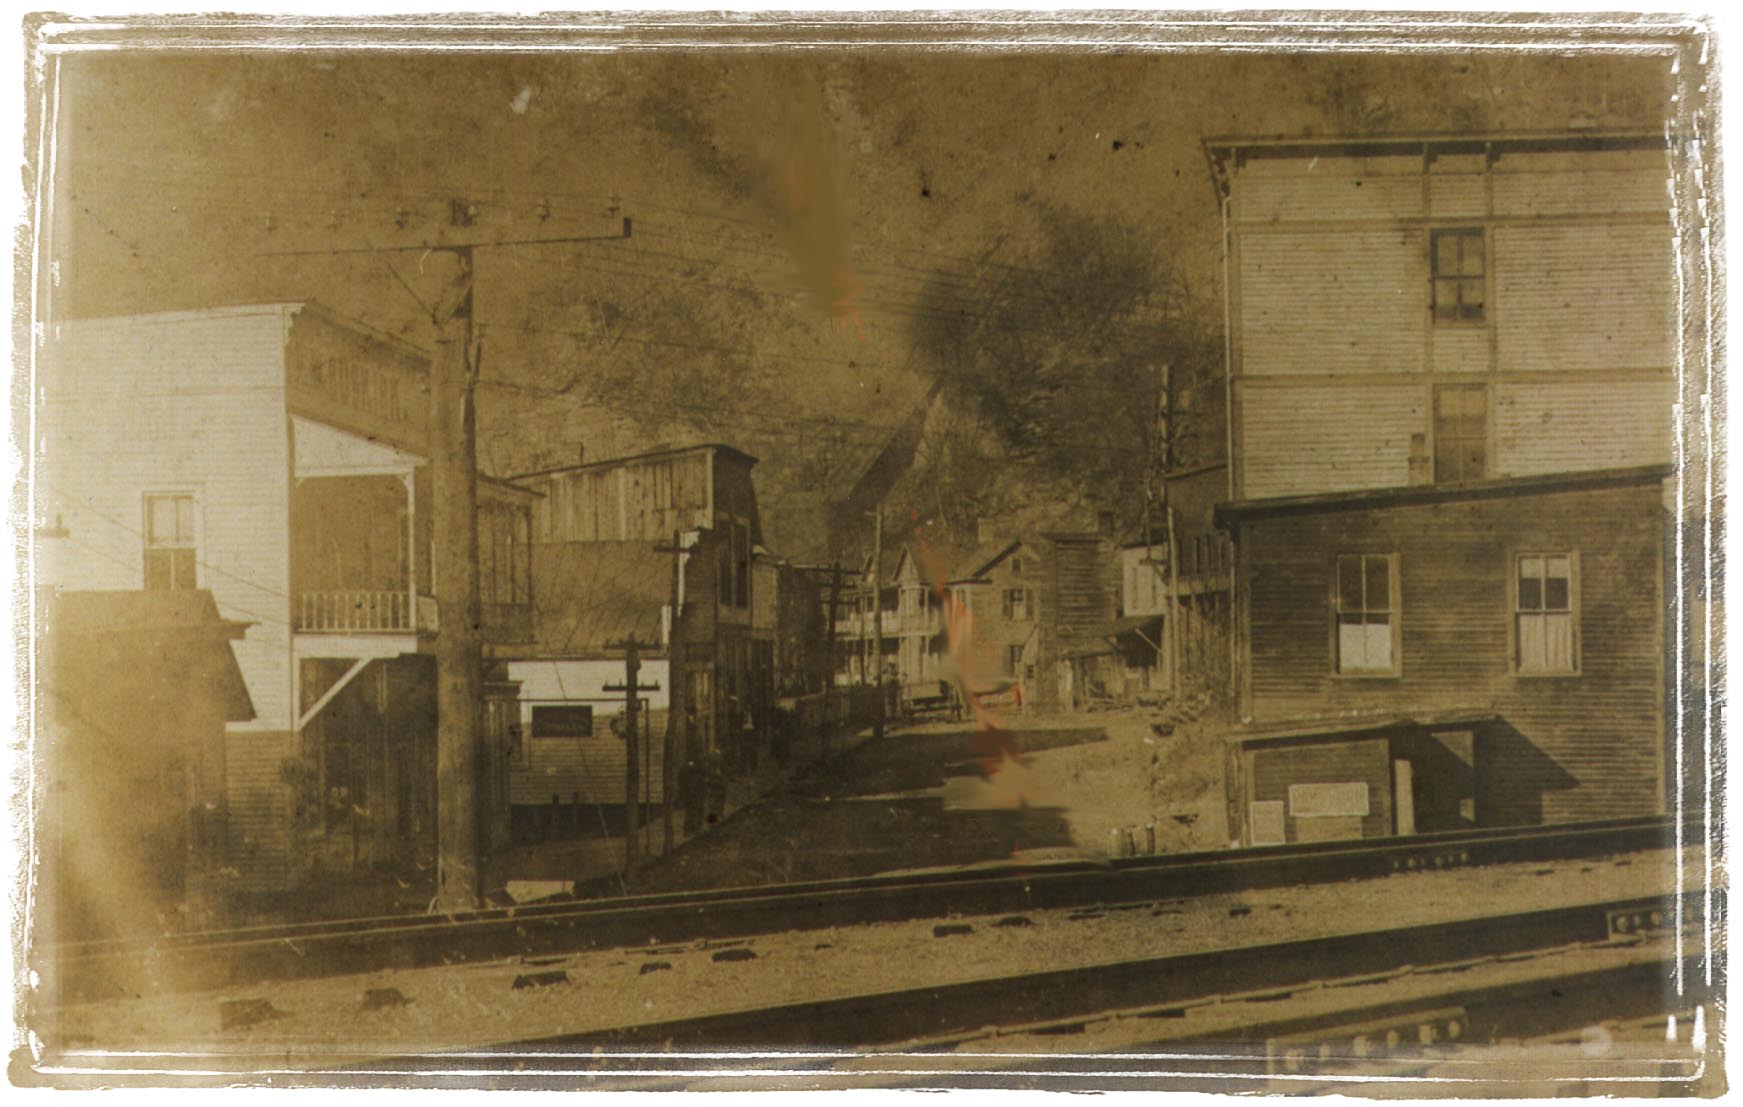 Matewan in the early 1900's